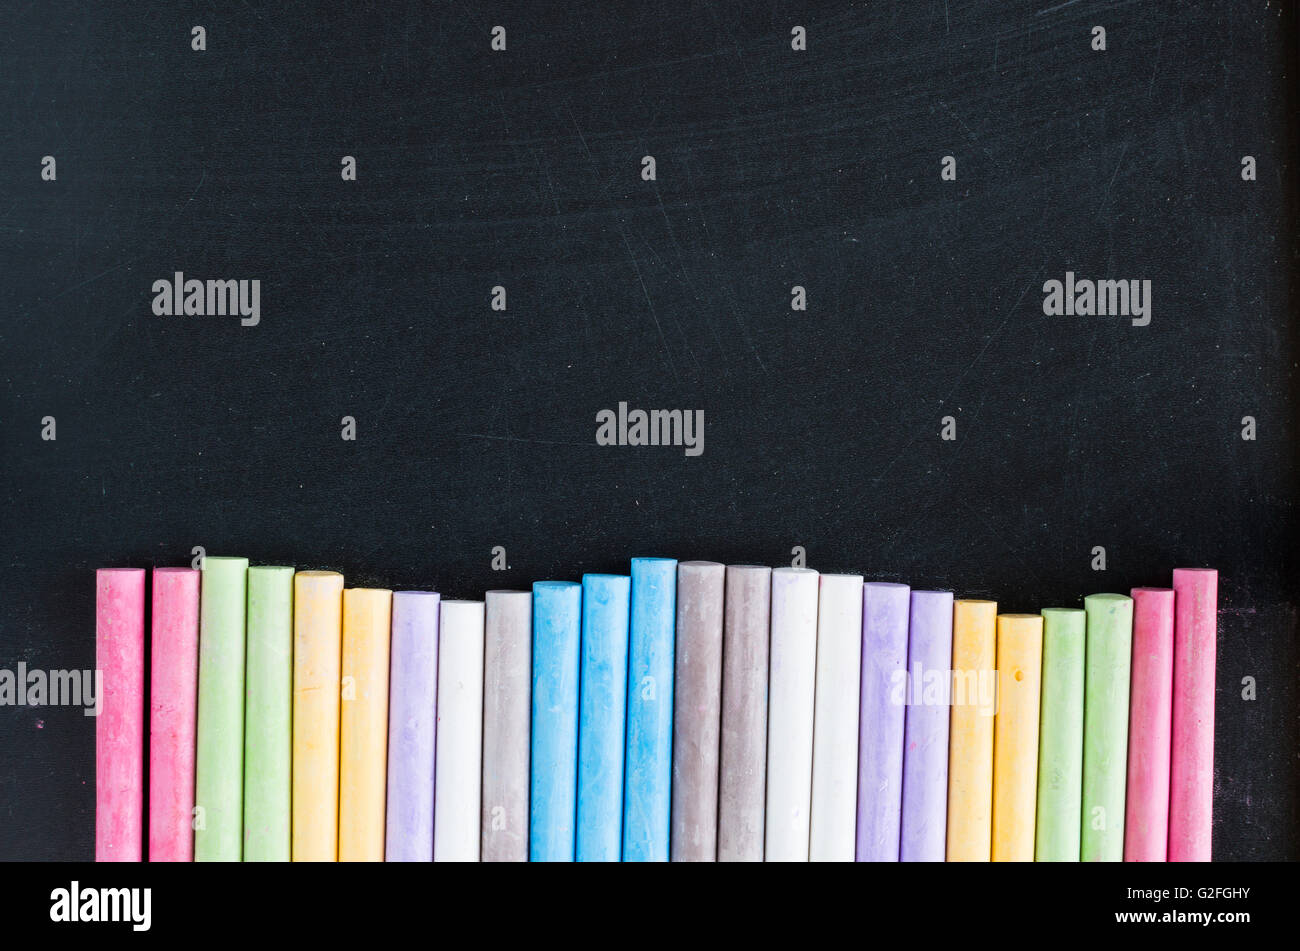 Colorful chalks lined up on school blackboard background Stock Photo